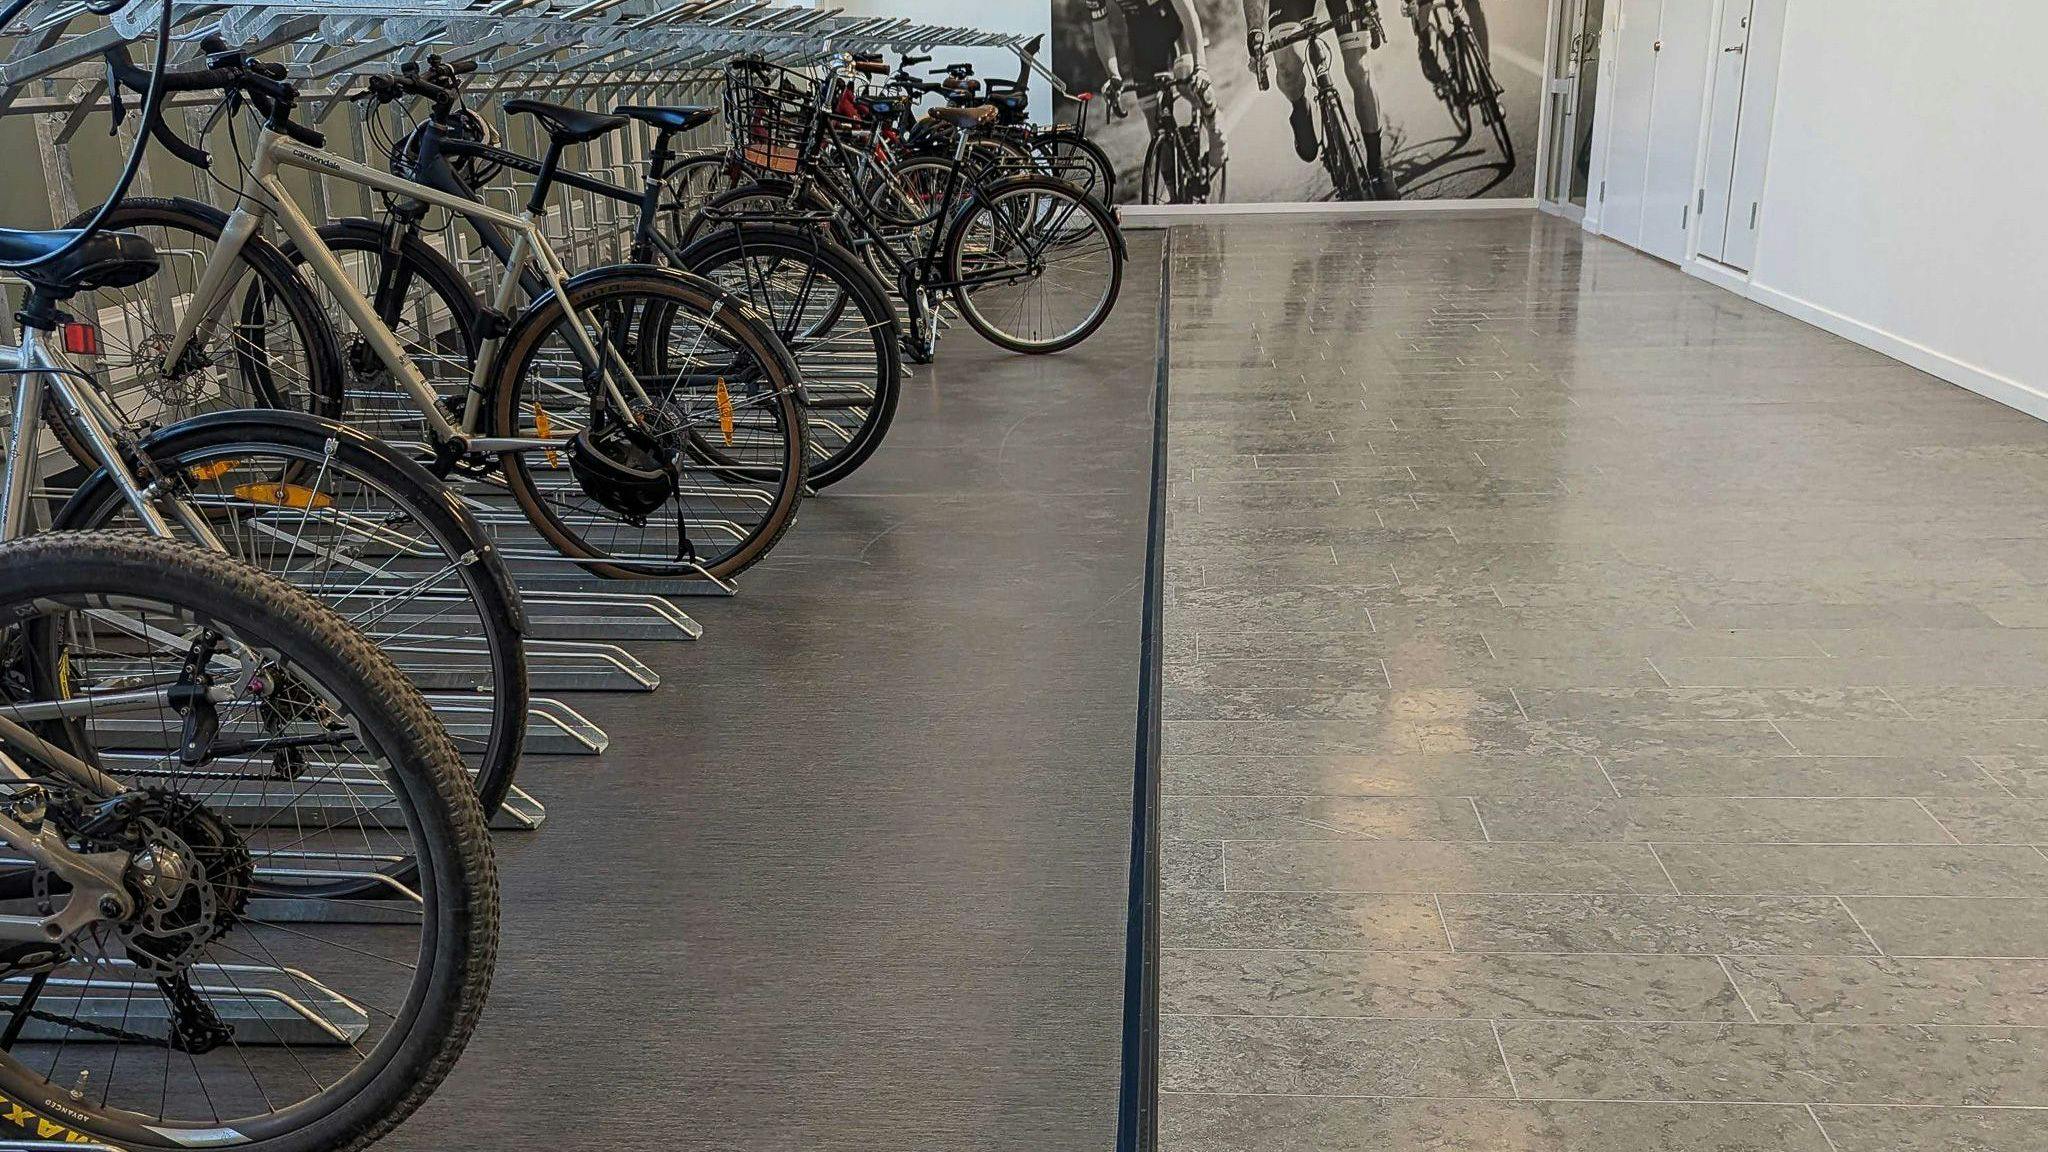 The Liquid Swords bicycle garage. Bikes lined up on the left side of the room on gray flooring.